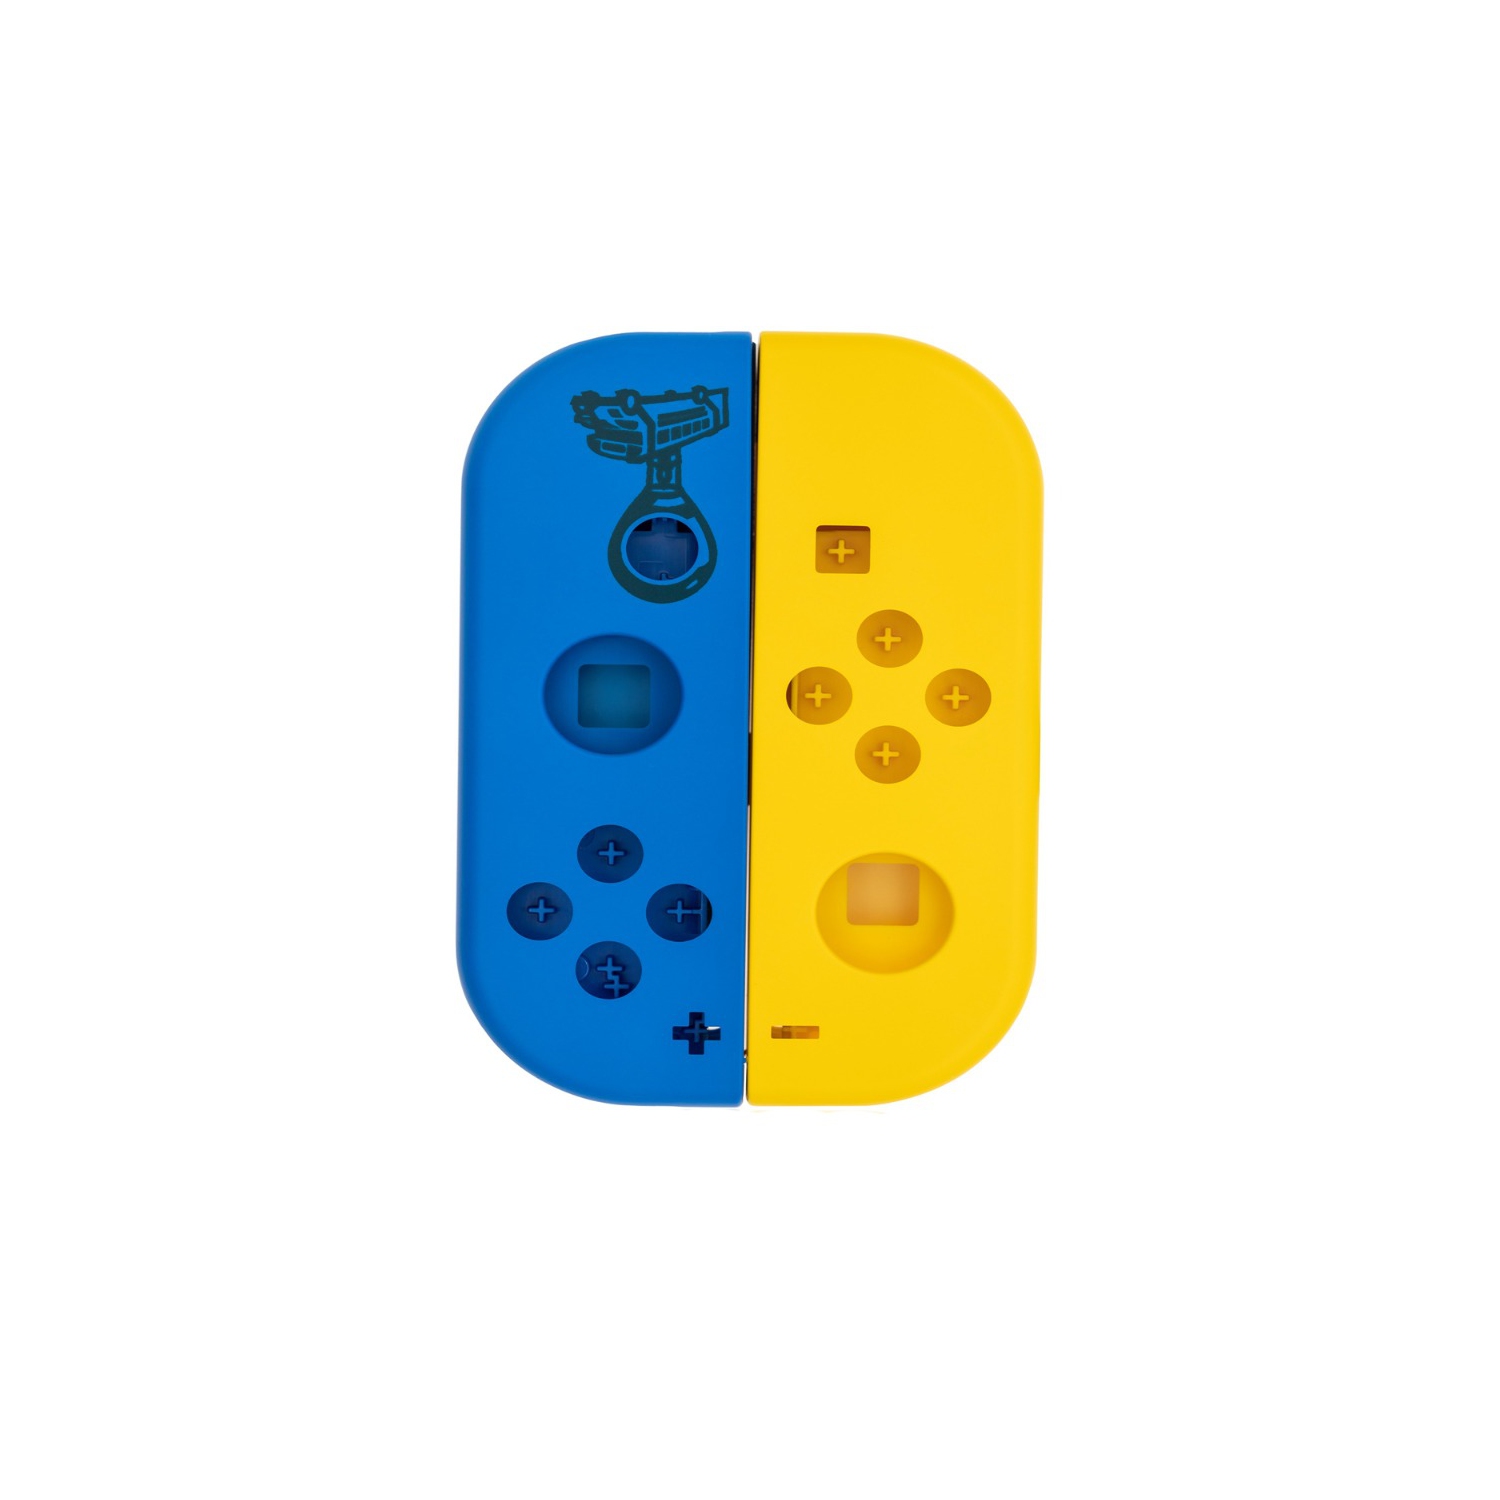 Replacement Housing Shell Case For Nintendo Switch Joy Con Controller - Yellow / Blue